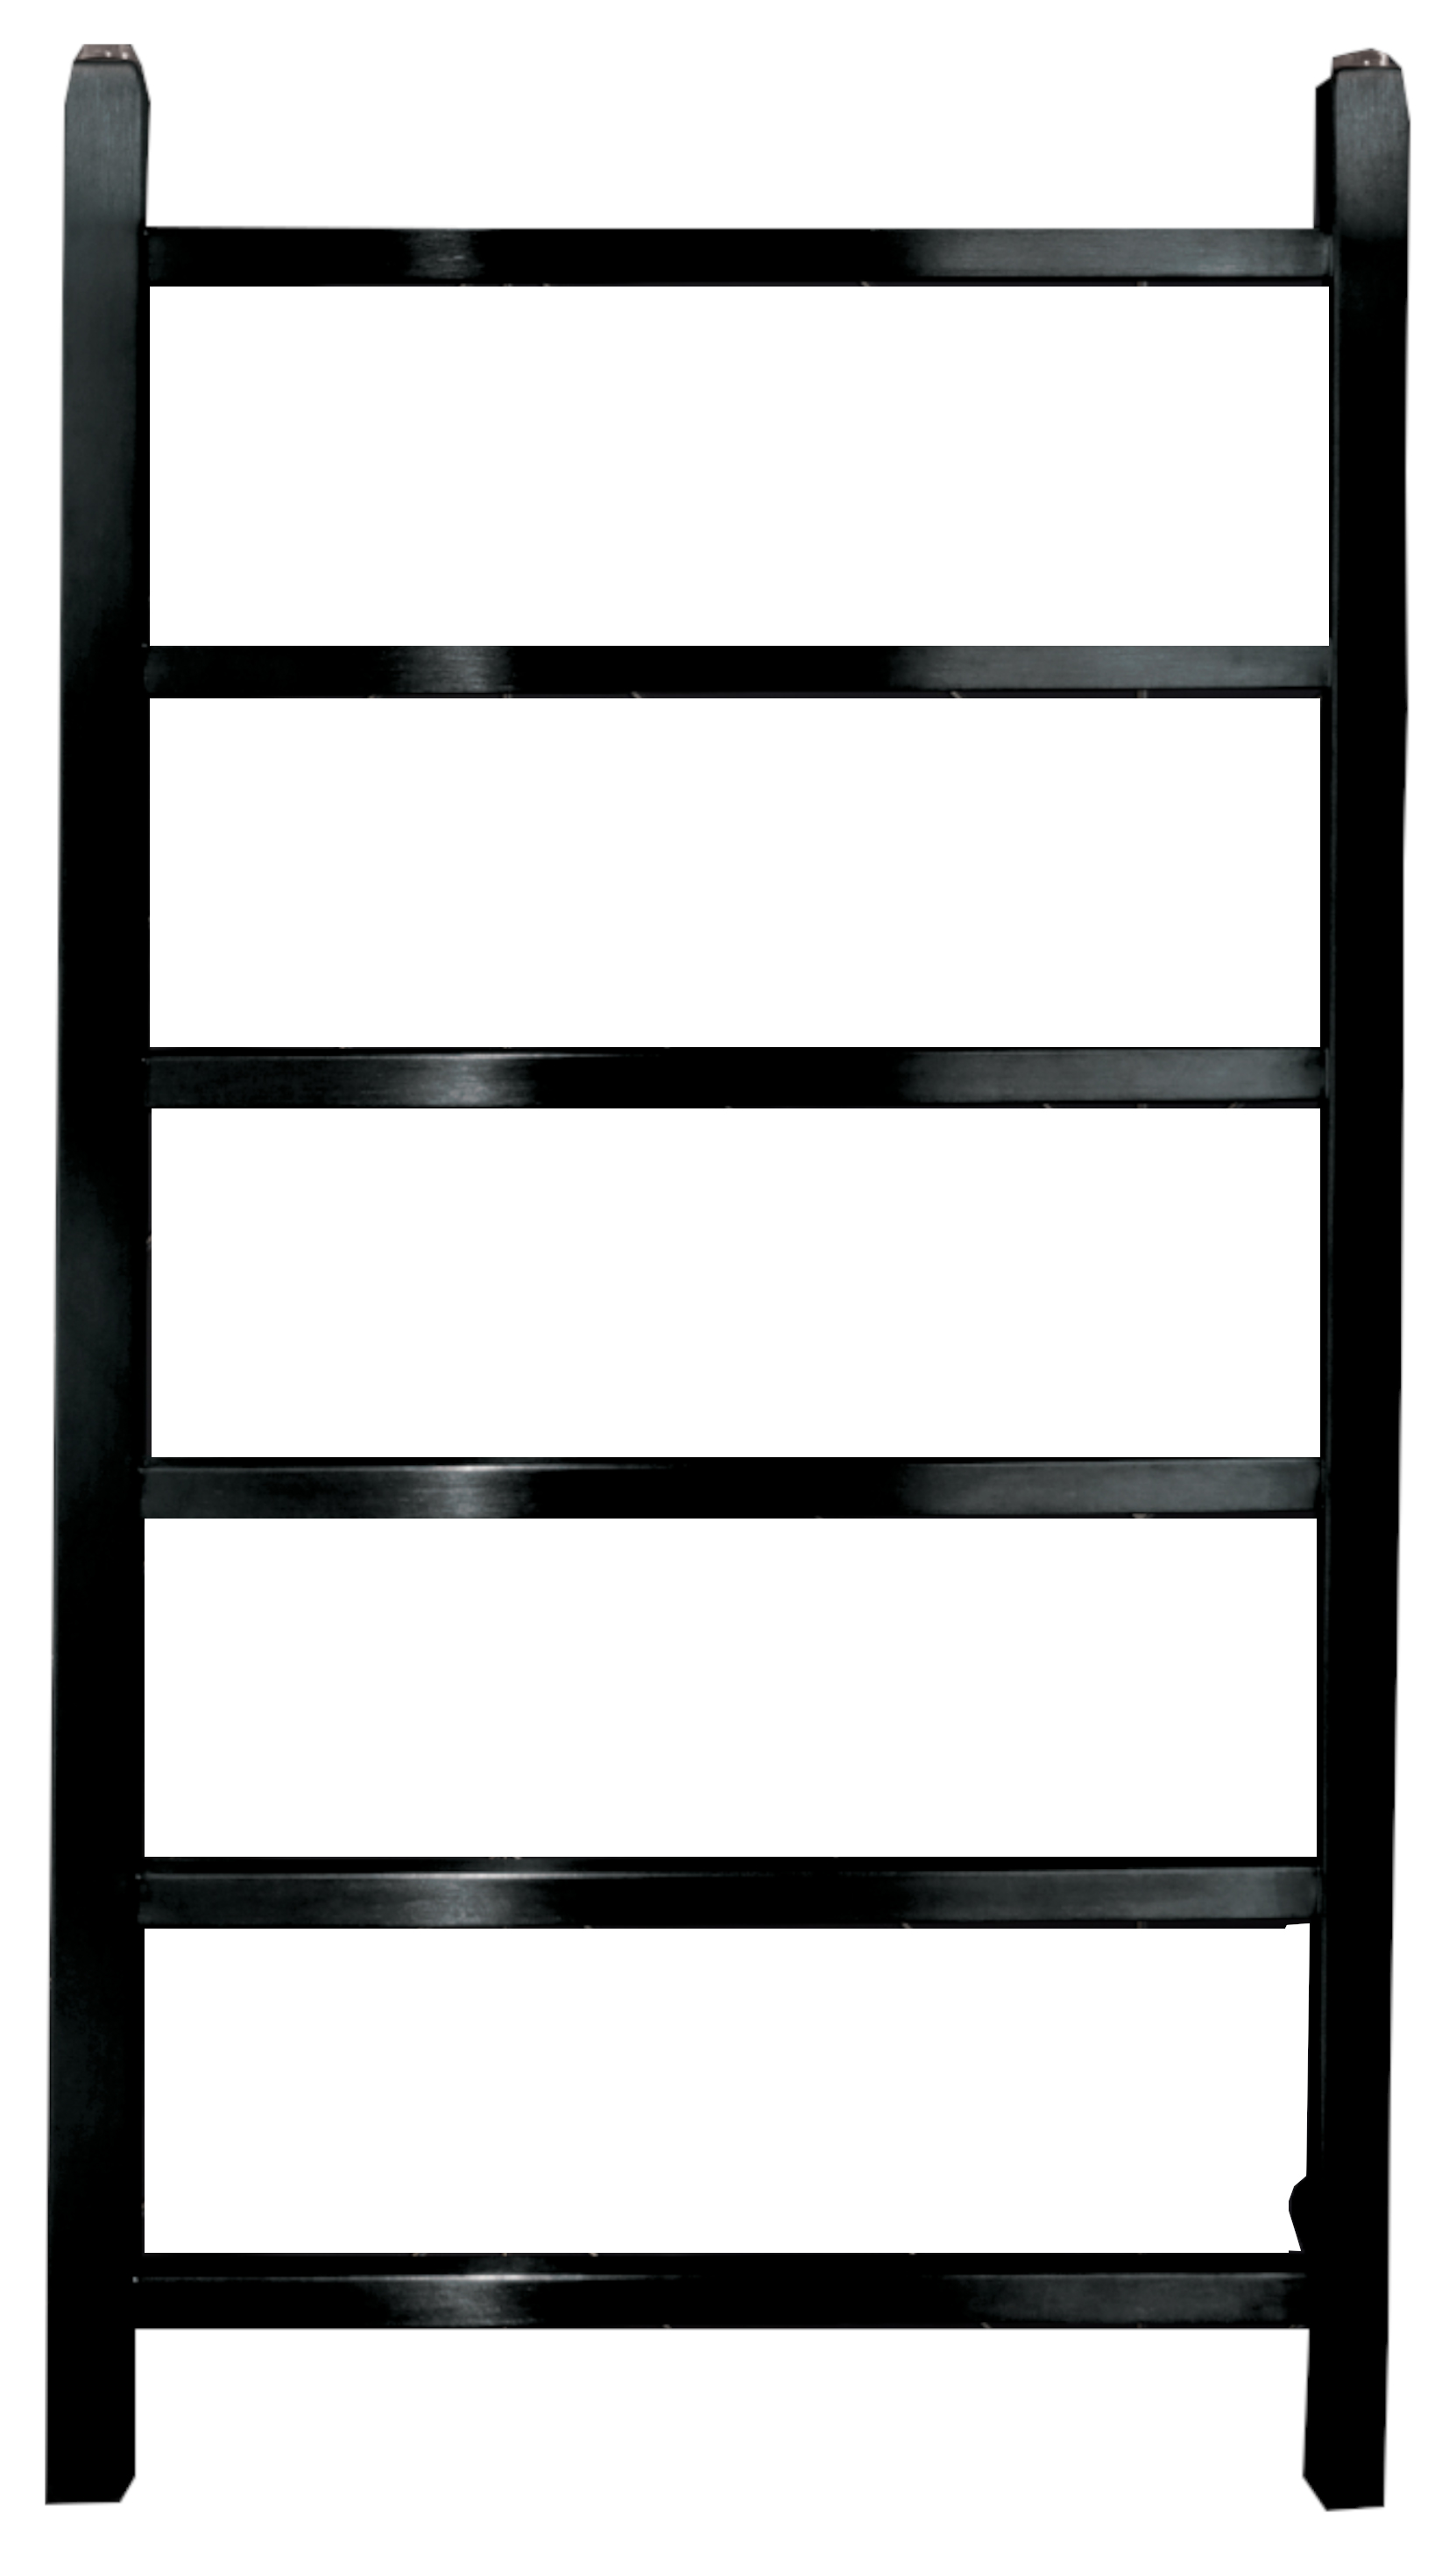 Image of Towelrads Diva Brushed Black Chrome Dry Electric Non Thermostatic Towel Radiator - 800 x 500mm